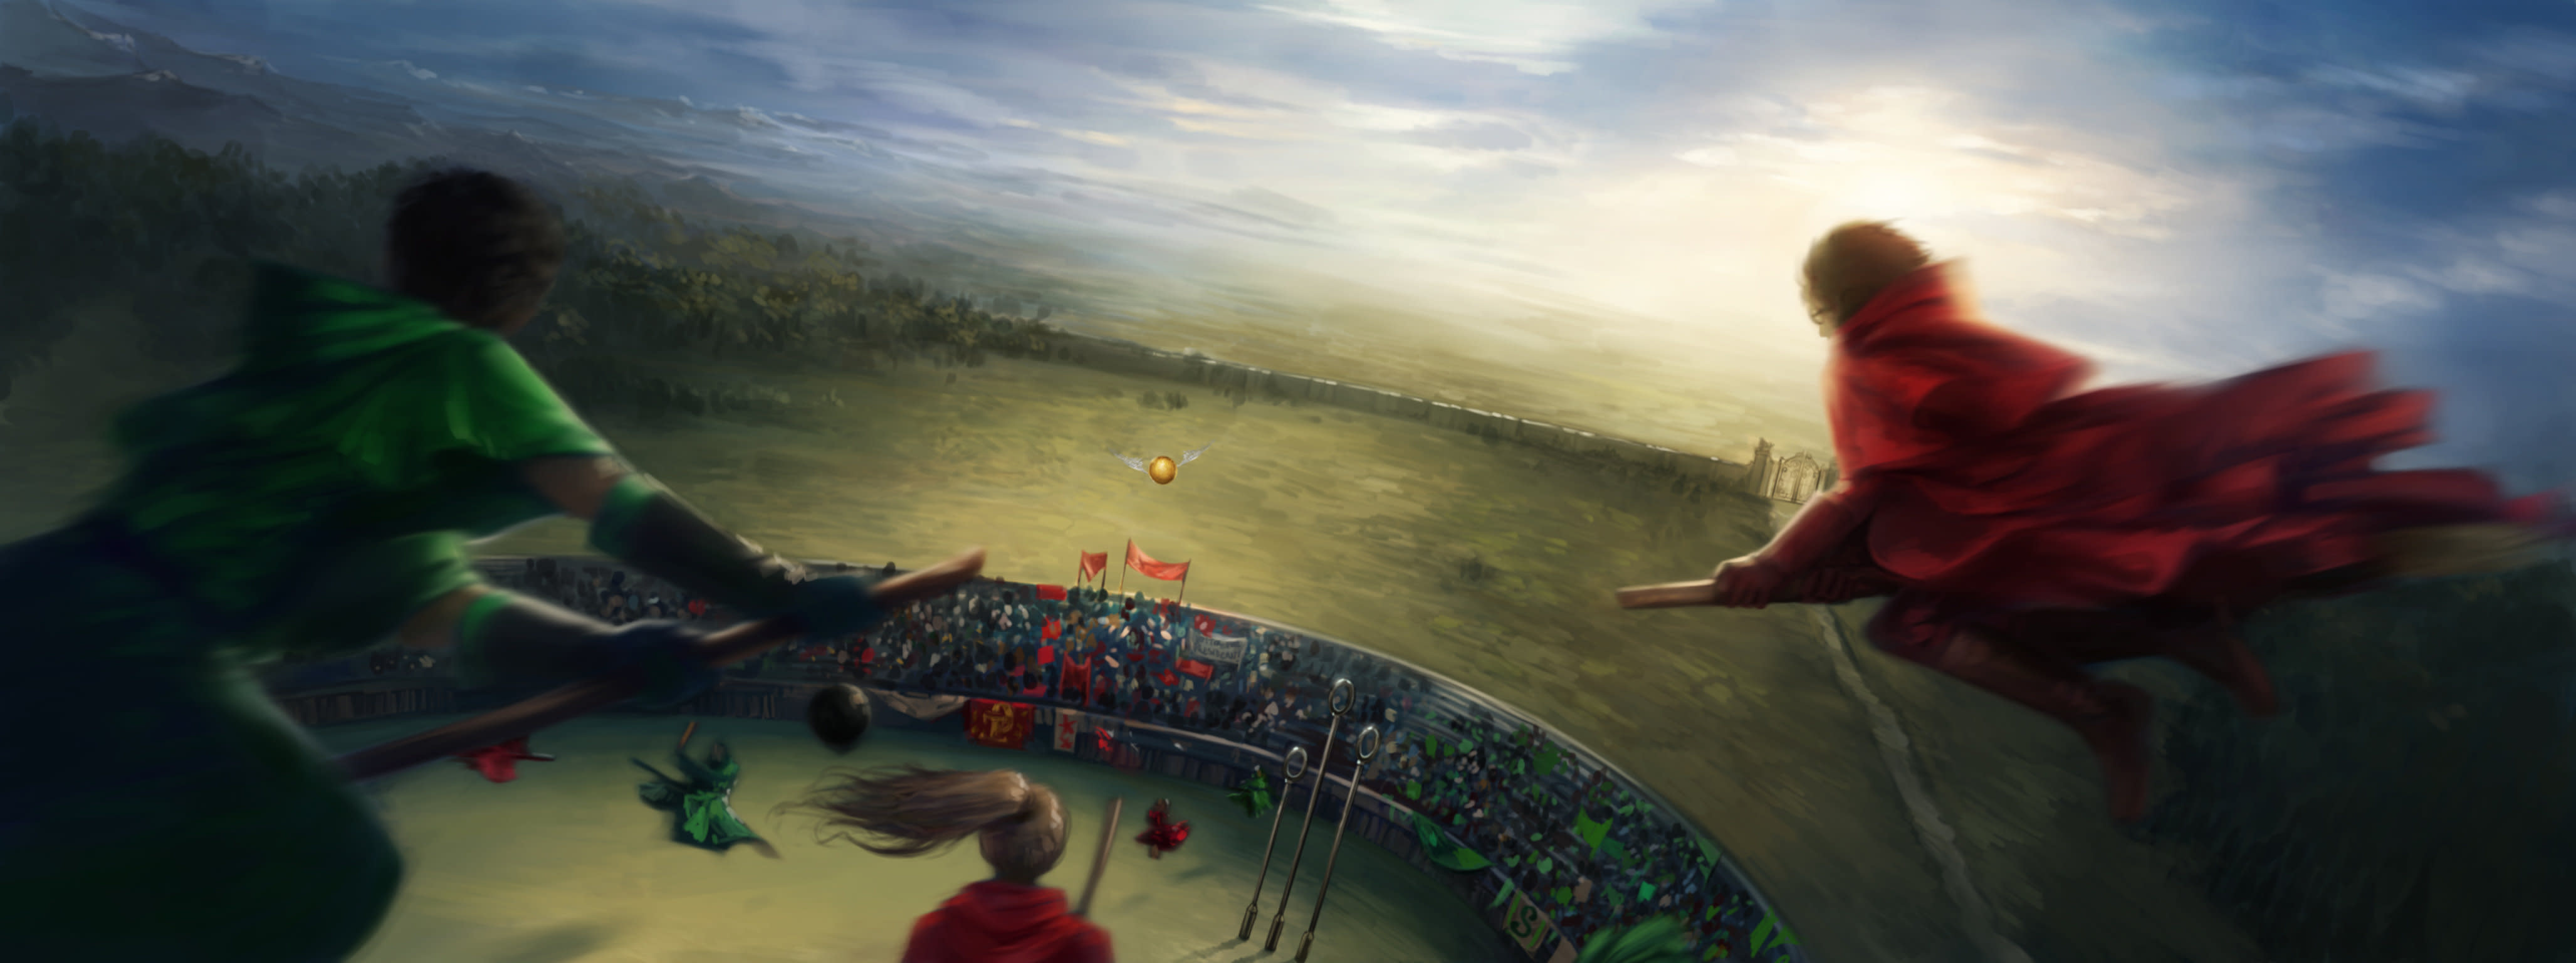 6 Reasons Why Quidditch Is Bad For Harry S Health Wizarding World